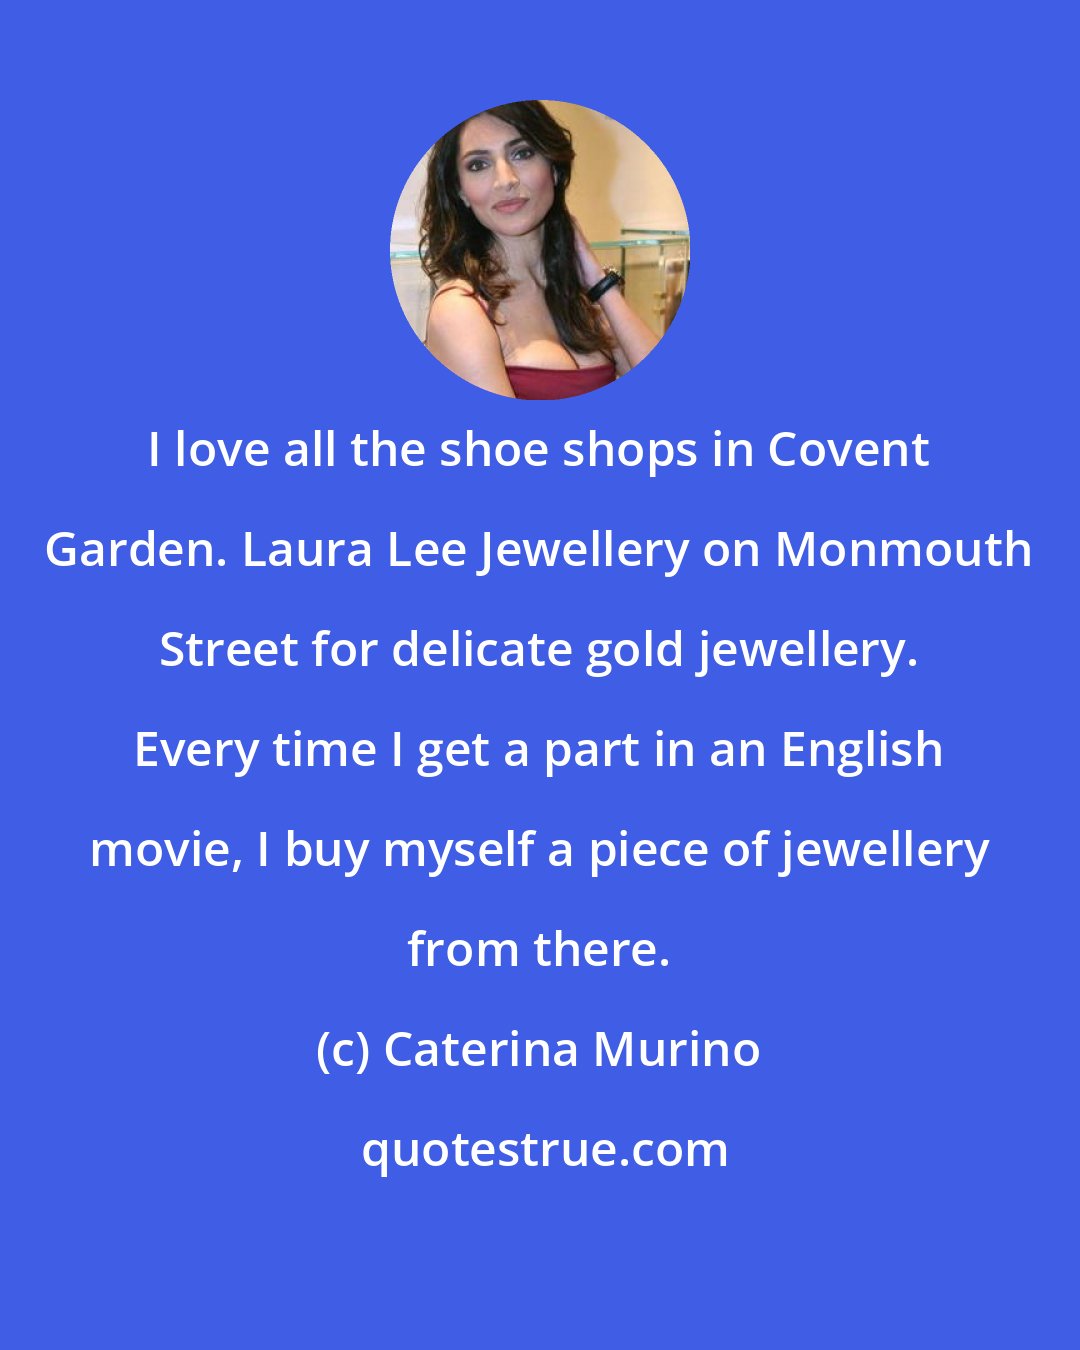 Caterina Murino: I love all the shoe shops in Covent Garden. Laura Lee Jewellery on Monmouth Street for delicate gold jewellery. Every time I get a part in an English movie, I buy myself a piece of jewellery from there.